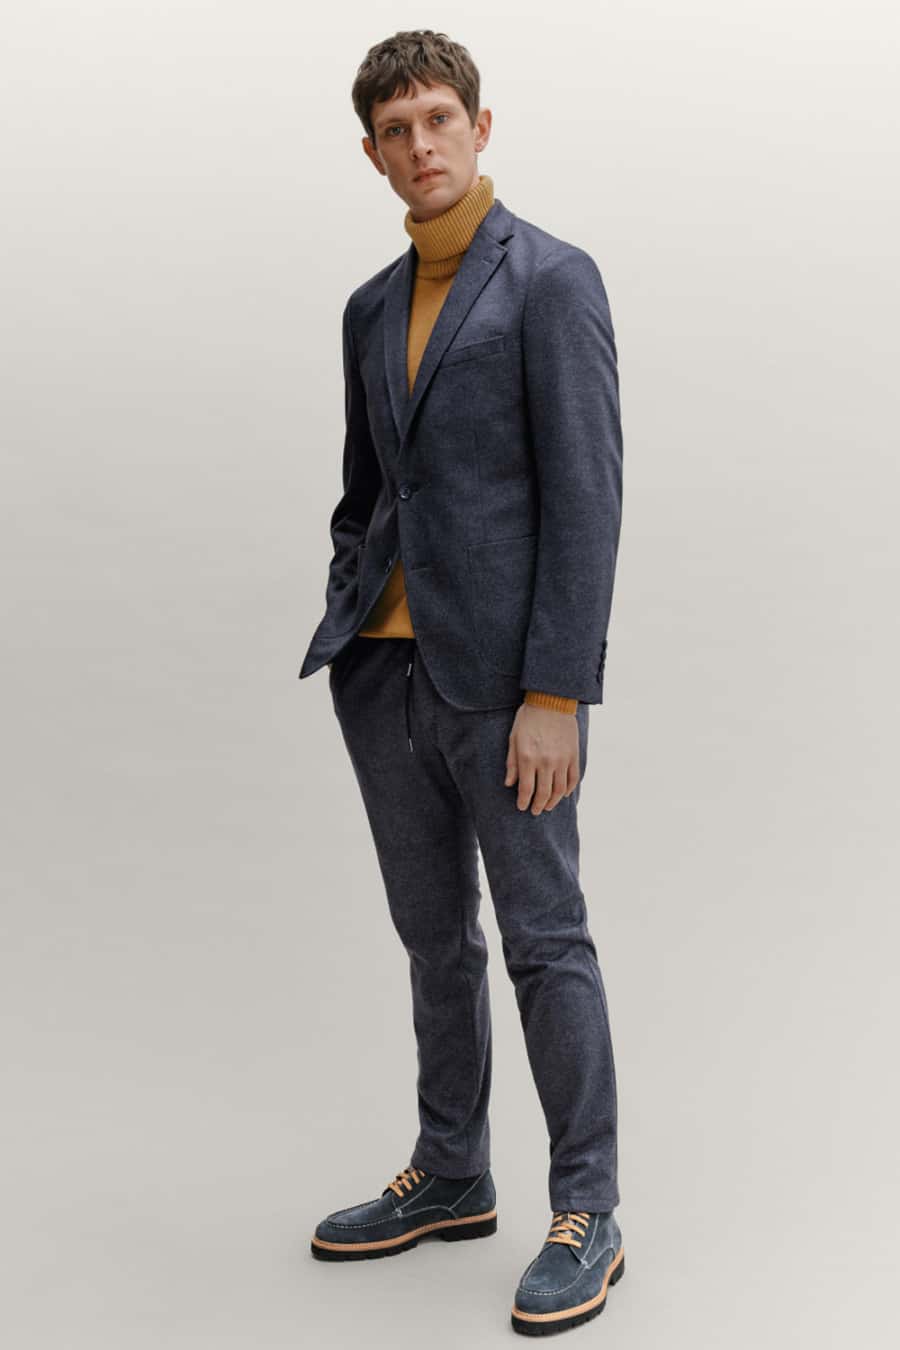 Men's textured suit, yellow chunky roll neck and blue suede work boots outfit